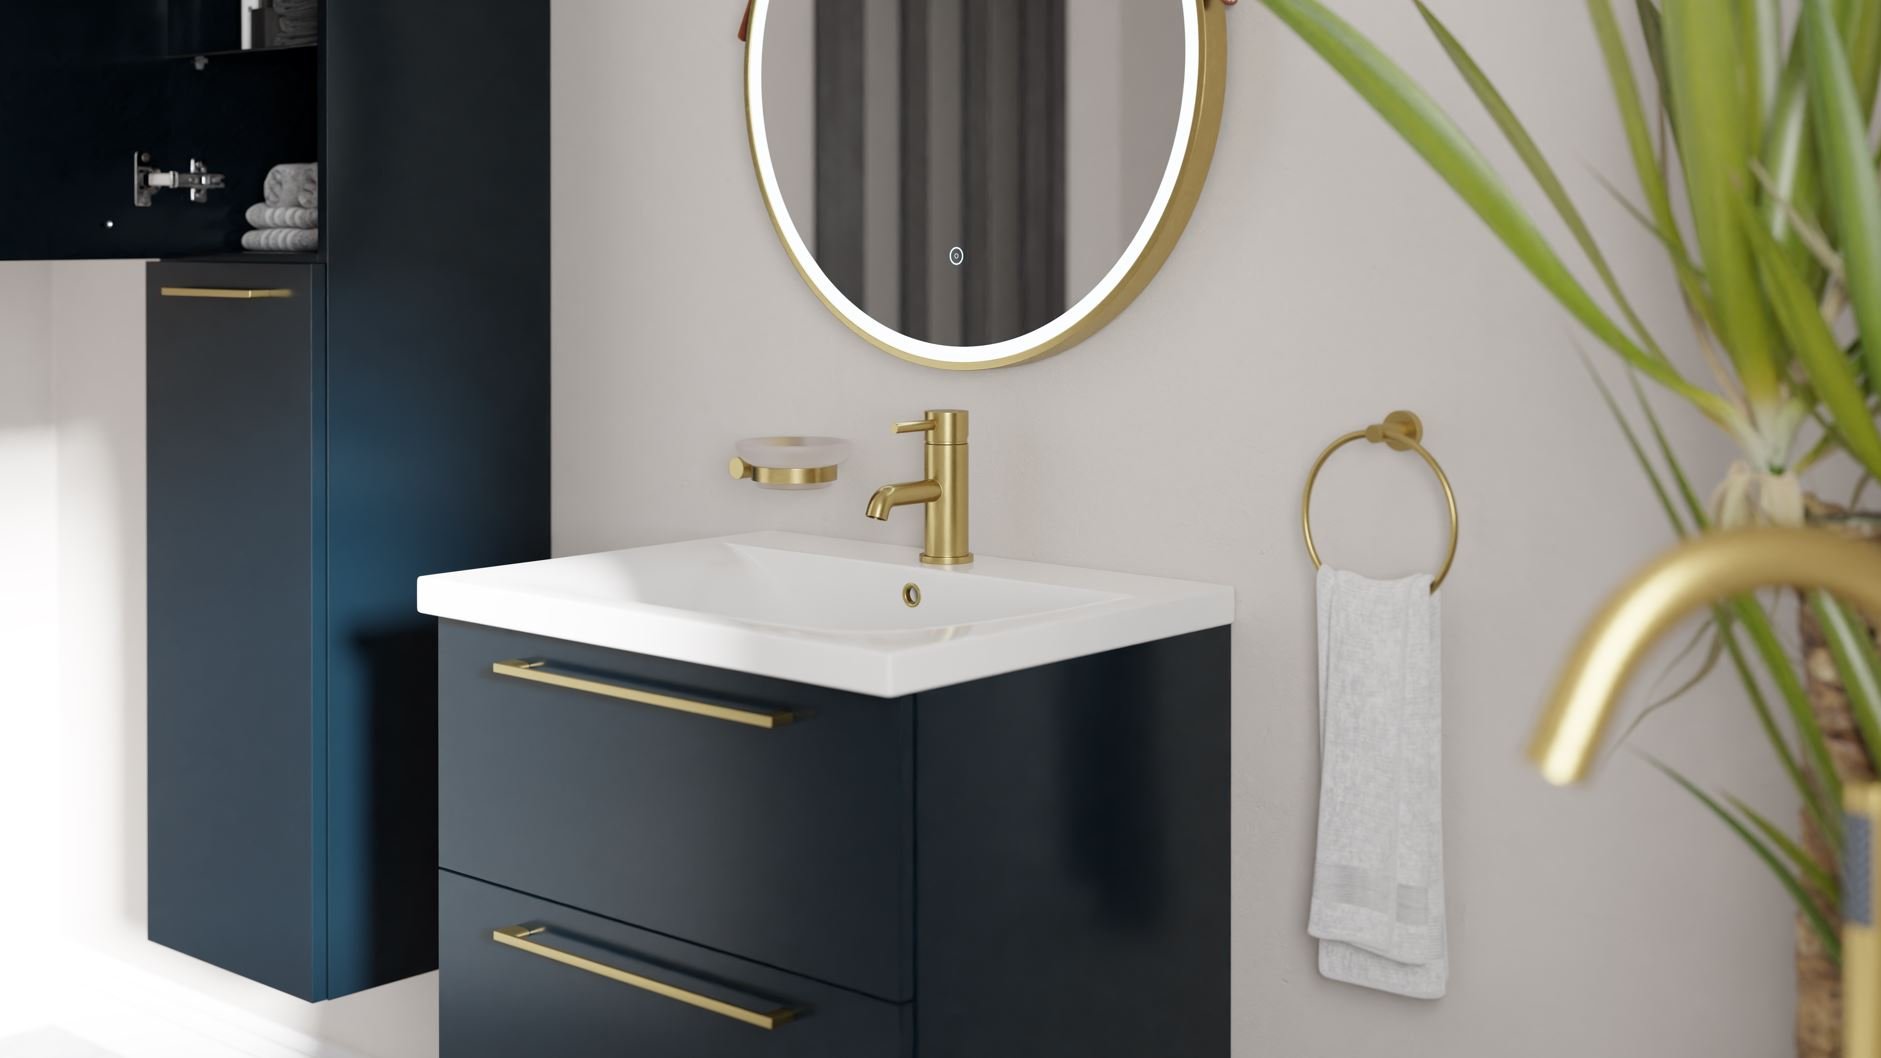 Gold Basin Taps and Bathroom Fixtures